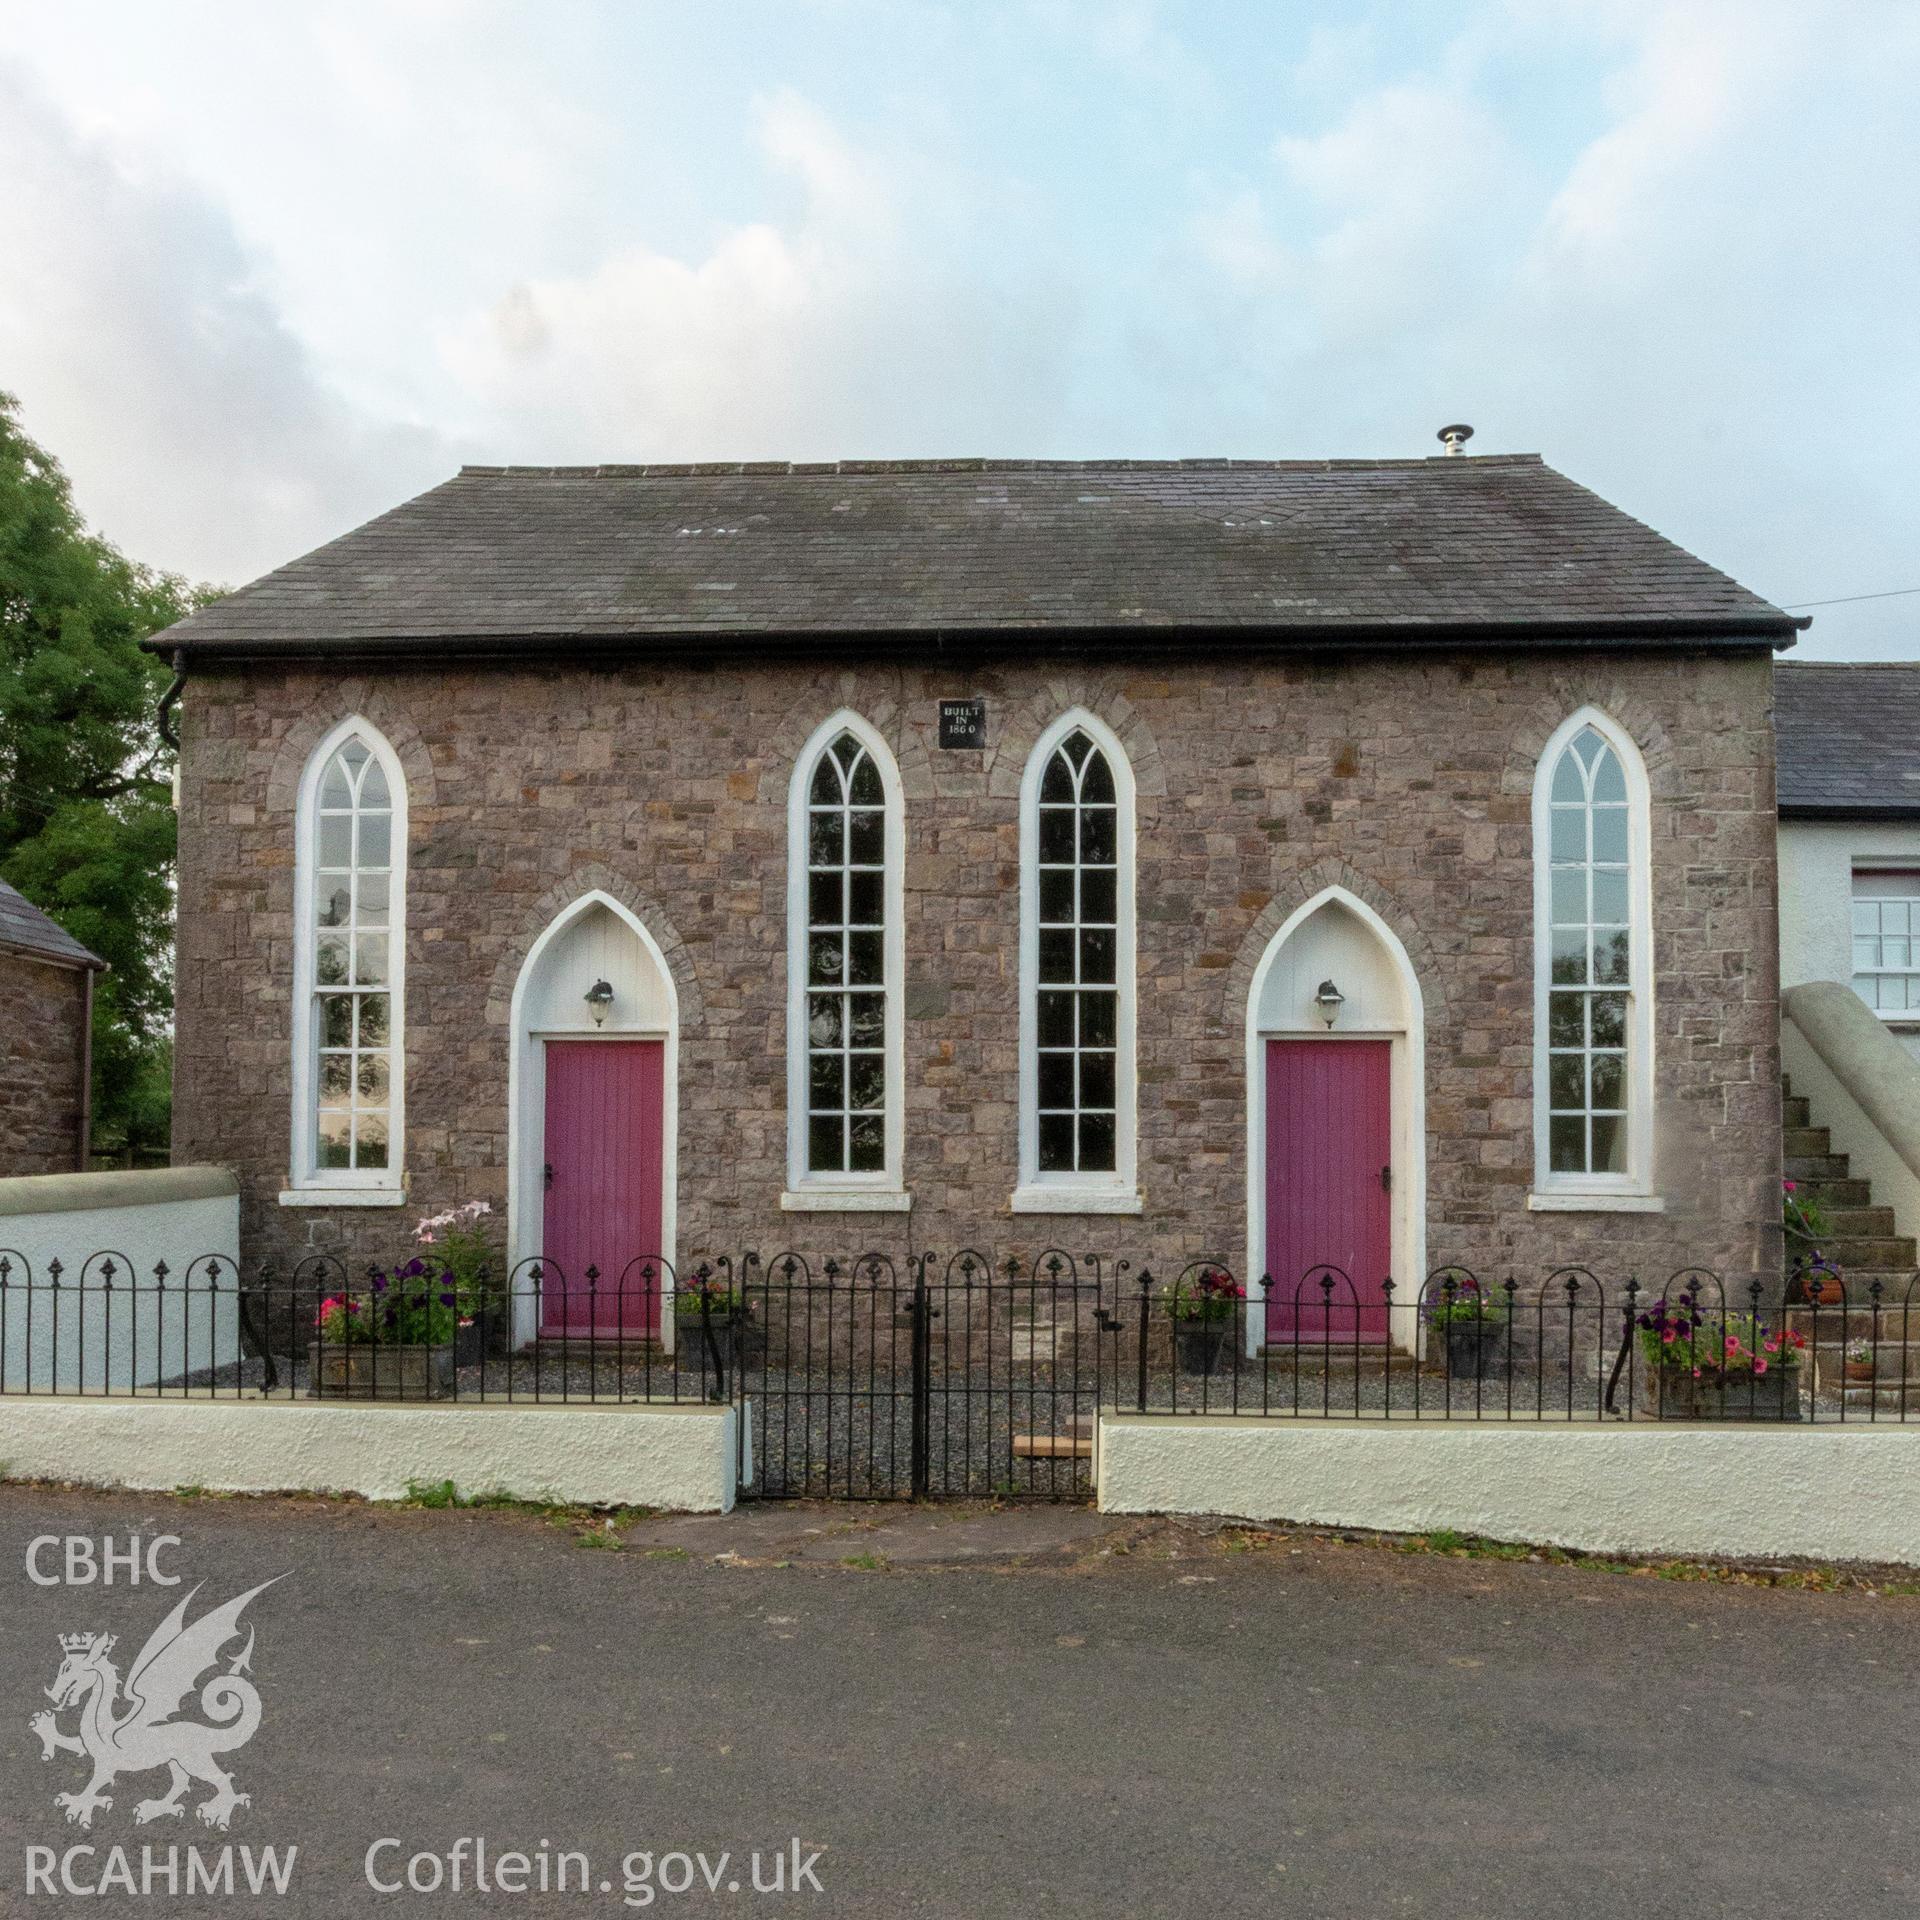 Colour photograph showing exterior view of Rama Independent Chapel, Llandyfaelog. Photographed by Richard Barrett on 17th July 2018.